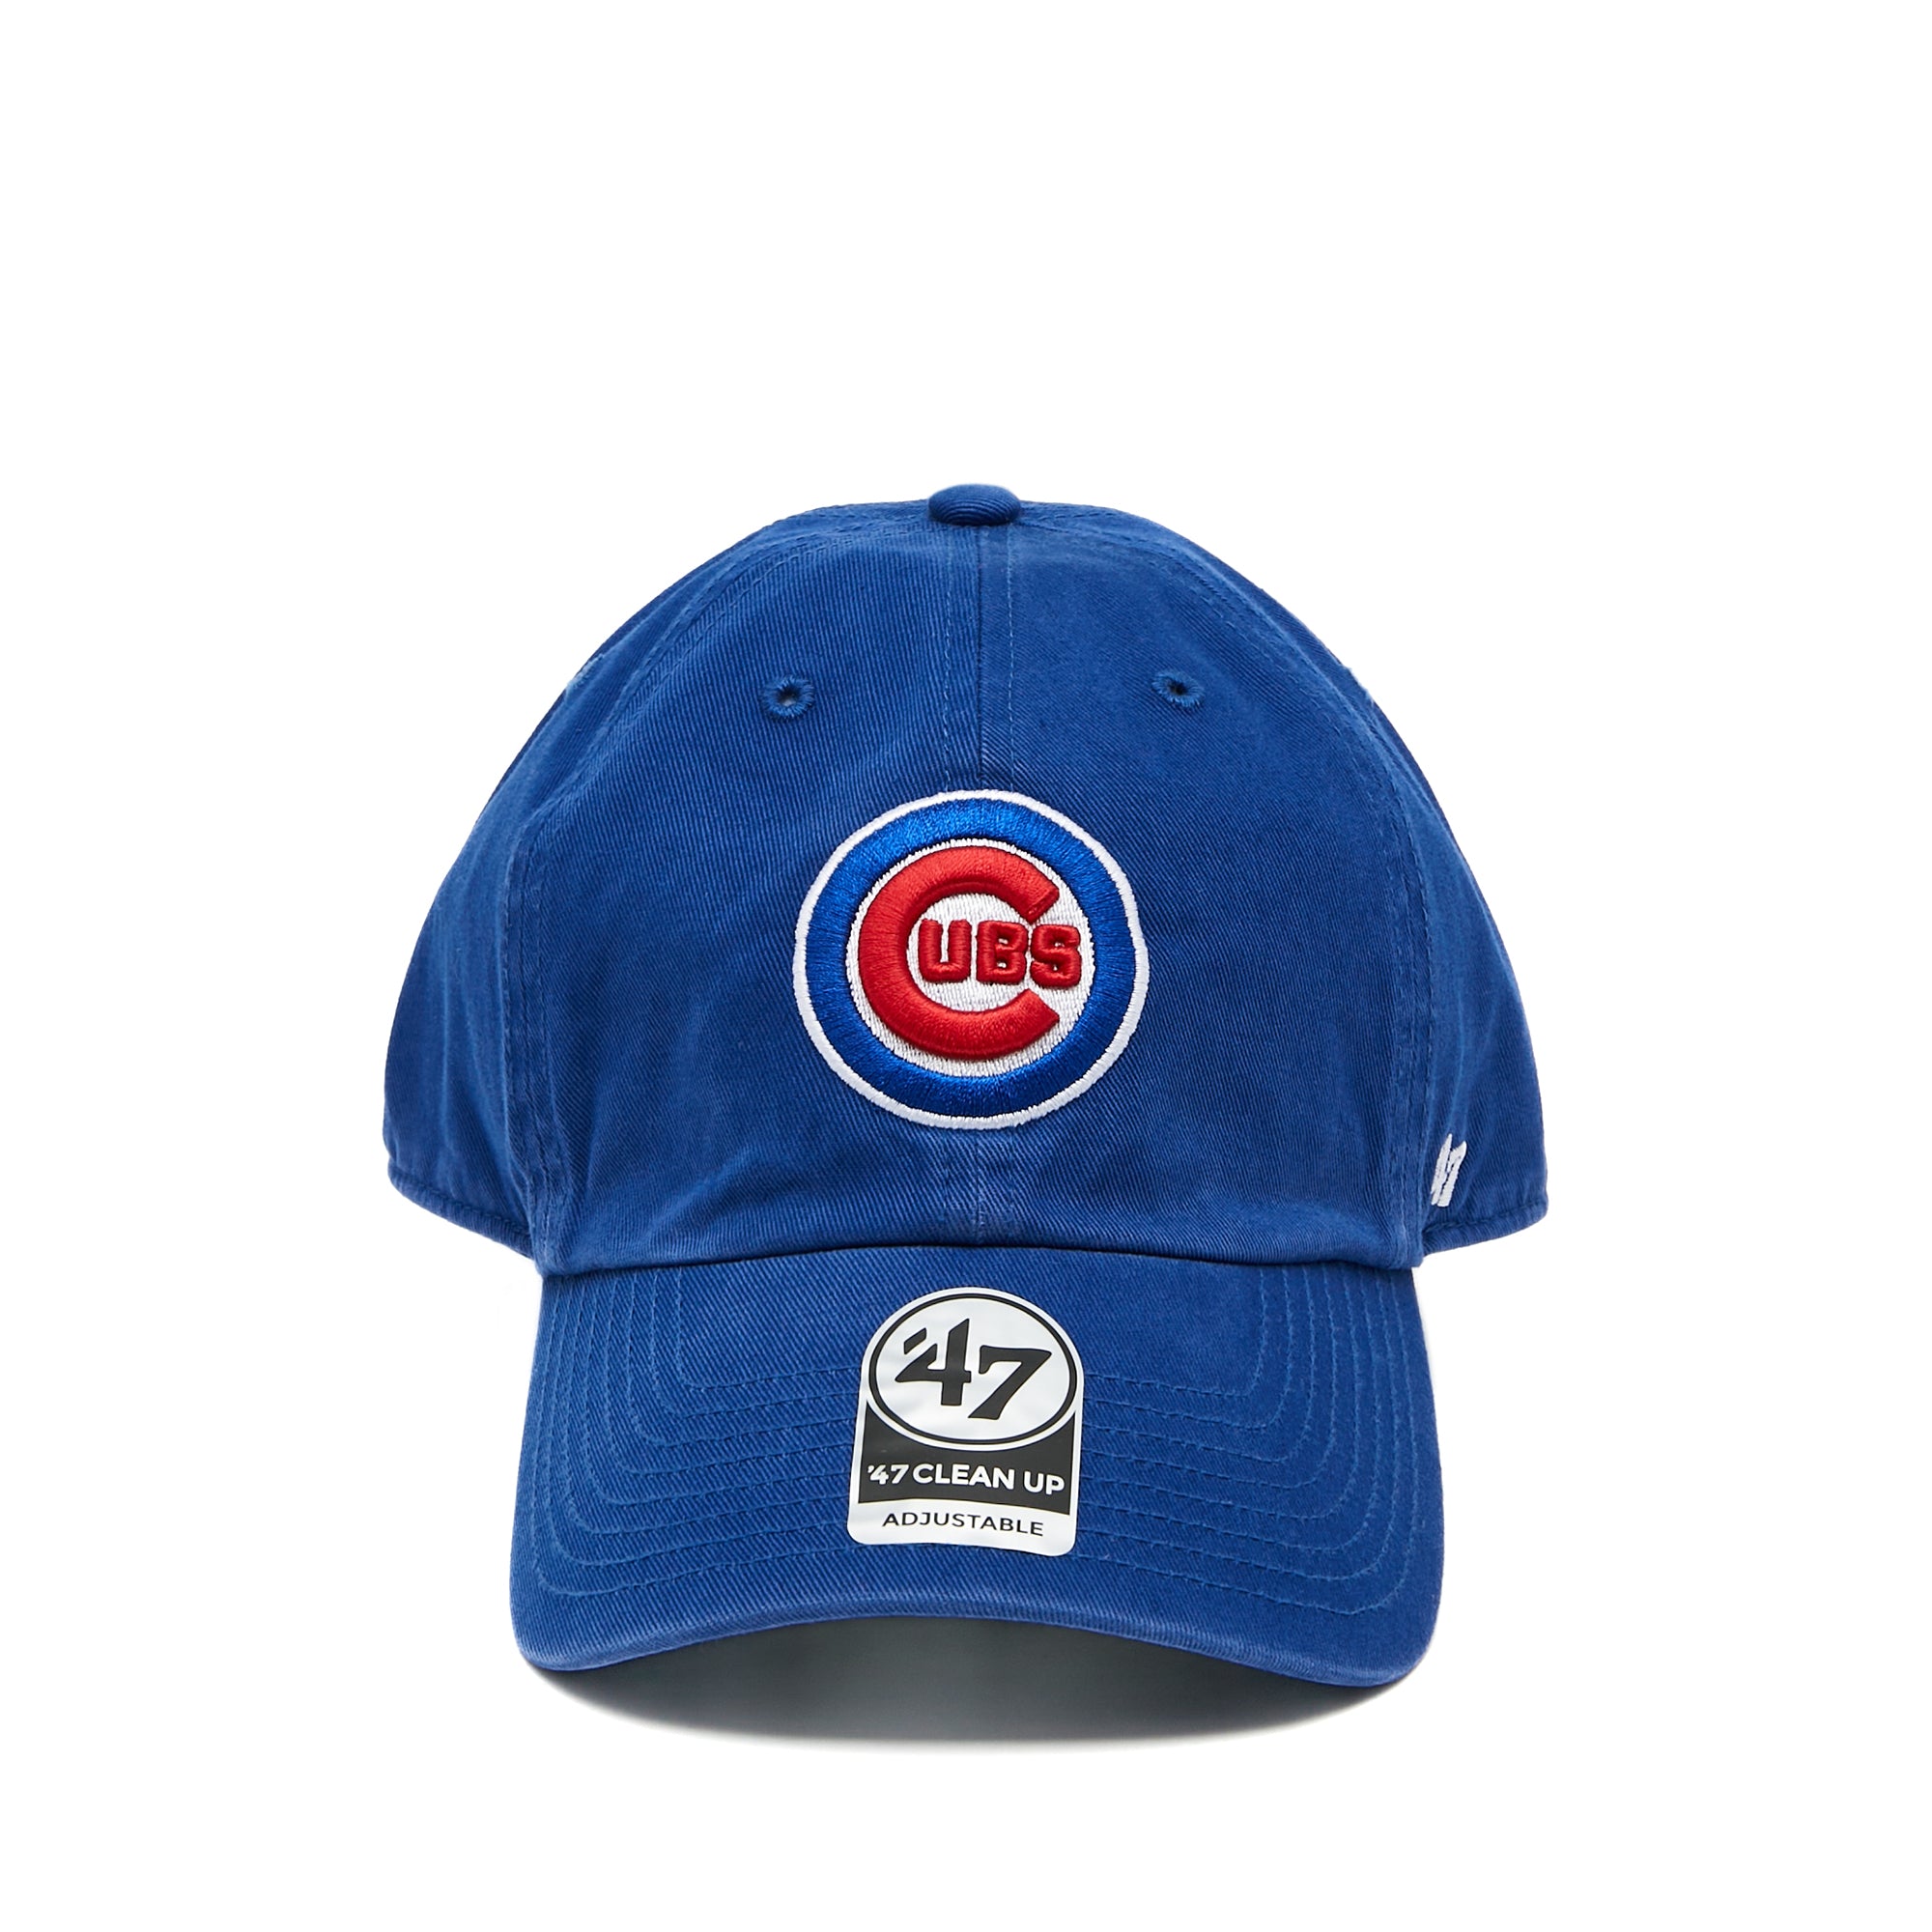 MLB Chicago Cubs '47 Clean Up Cap Royal One Size